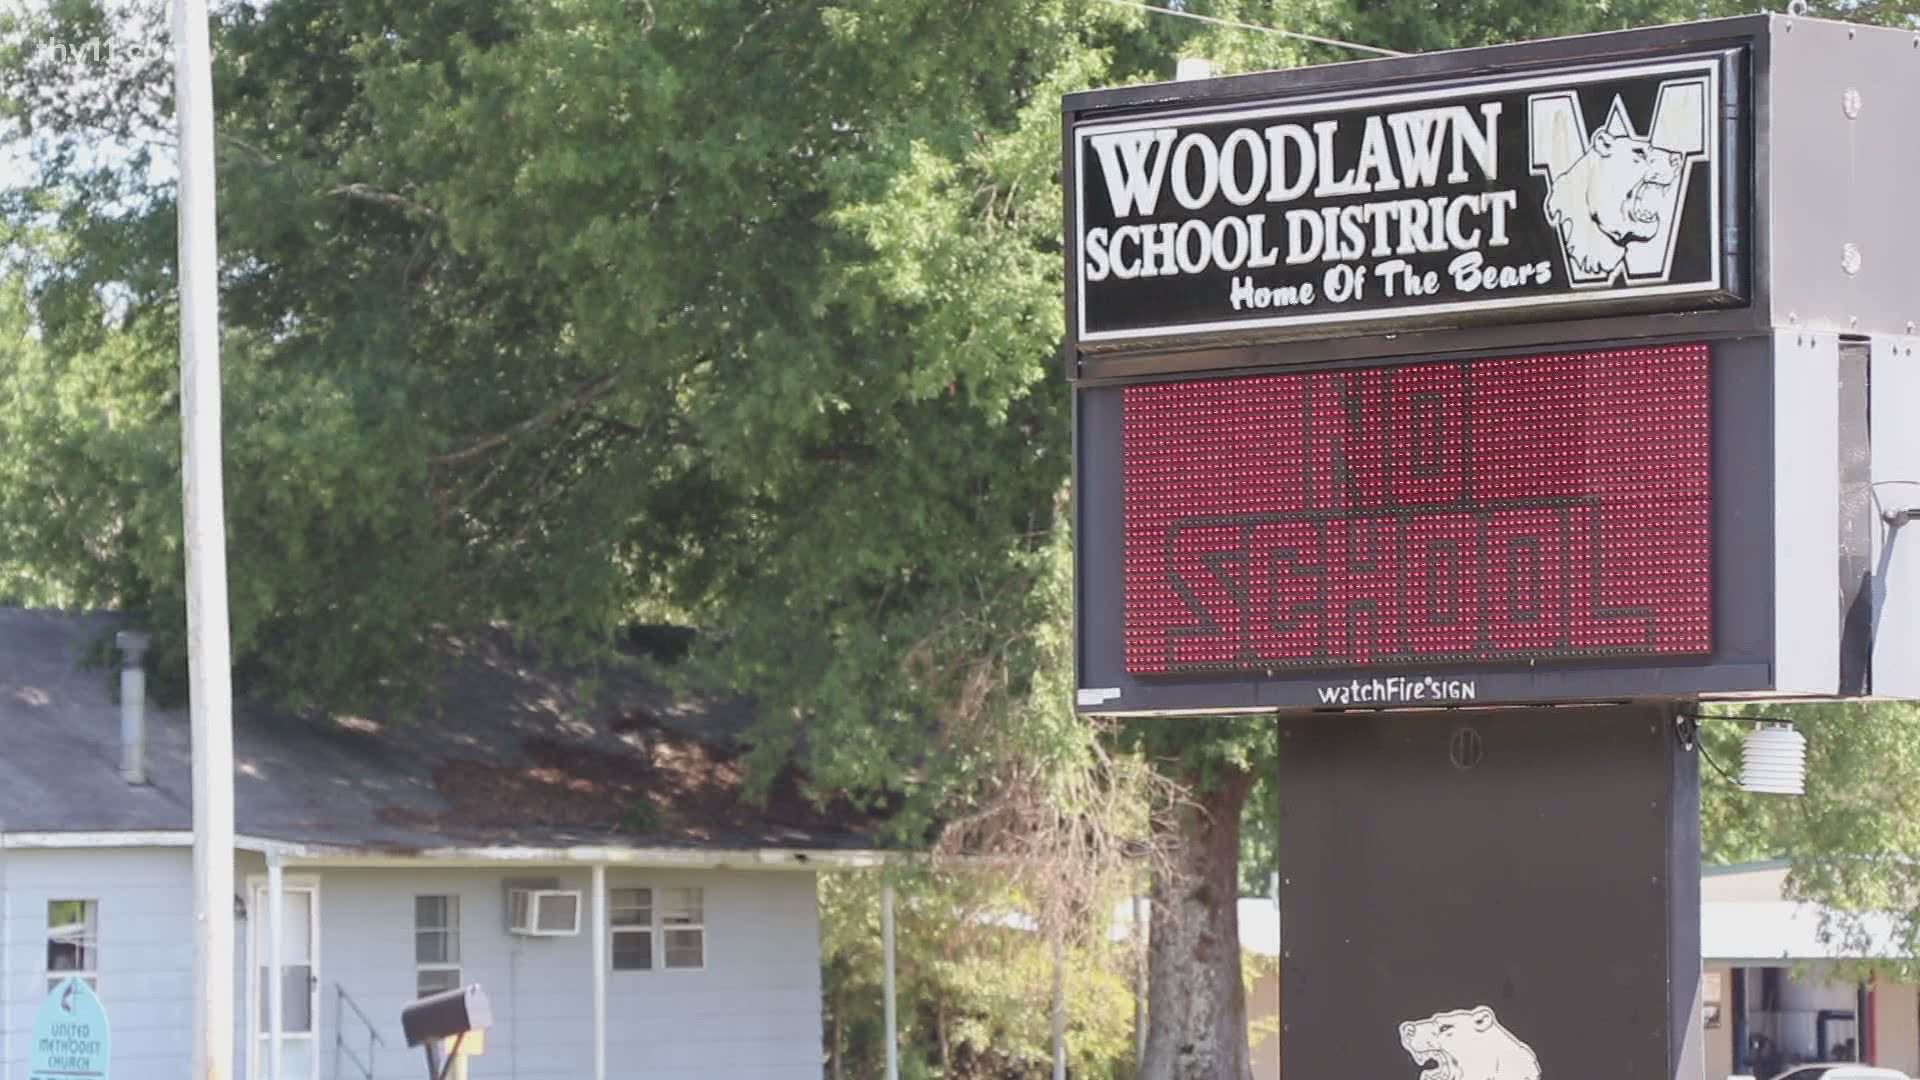 An Arkansas school district said on social media the night before school was set to start that the schools were closed until further notice so staff could be tested.